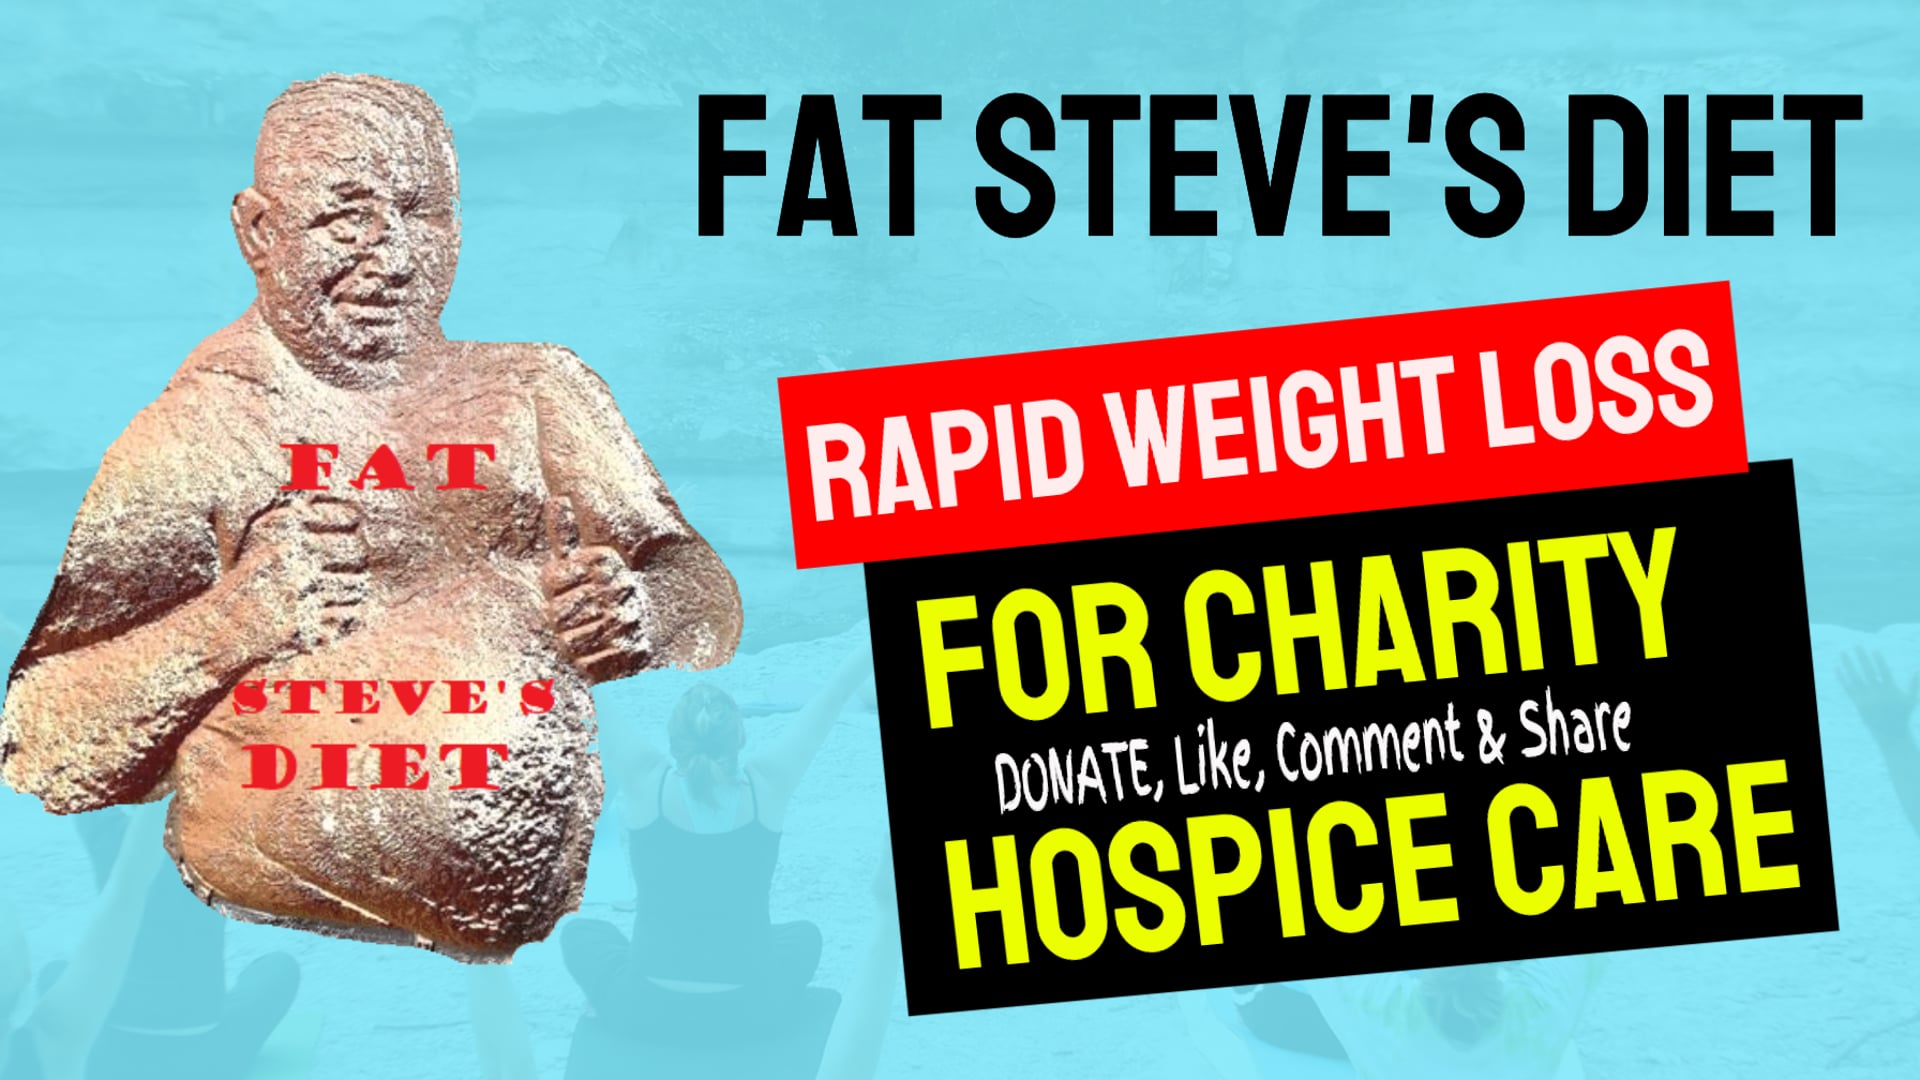 Fat Steves Rapid Weight Loss Diet For Hospice Care